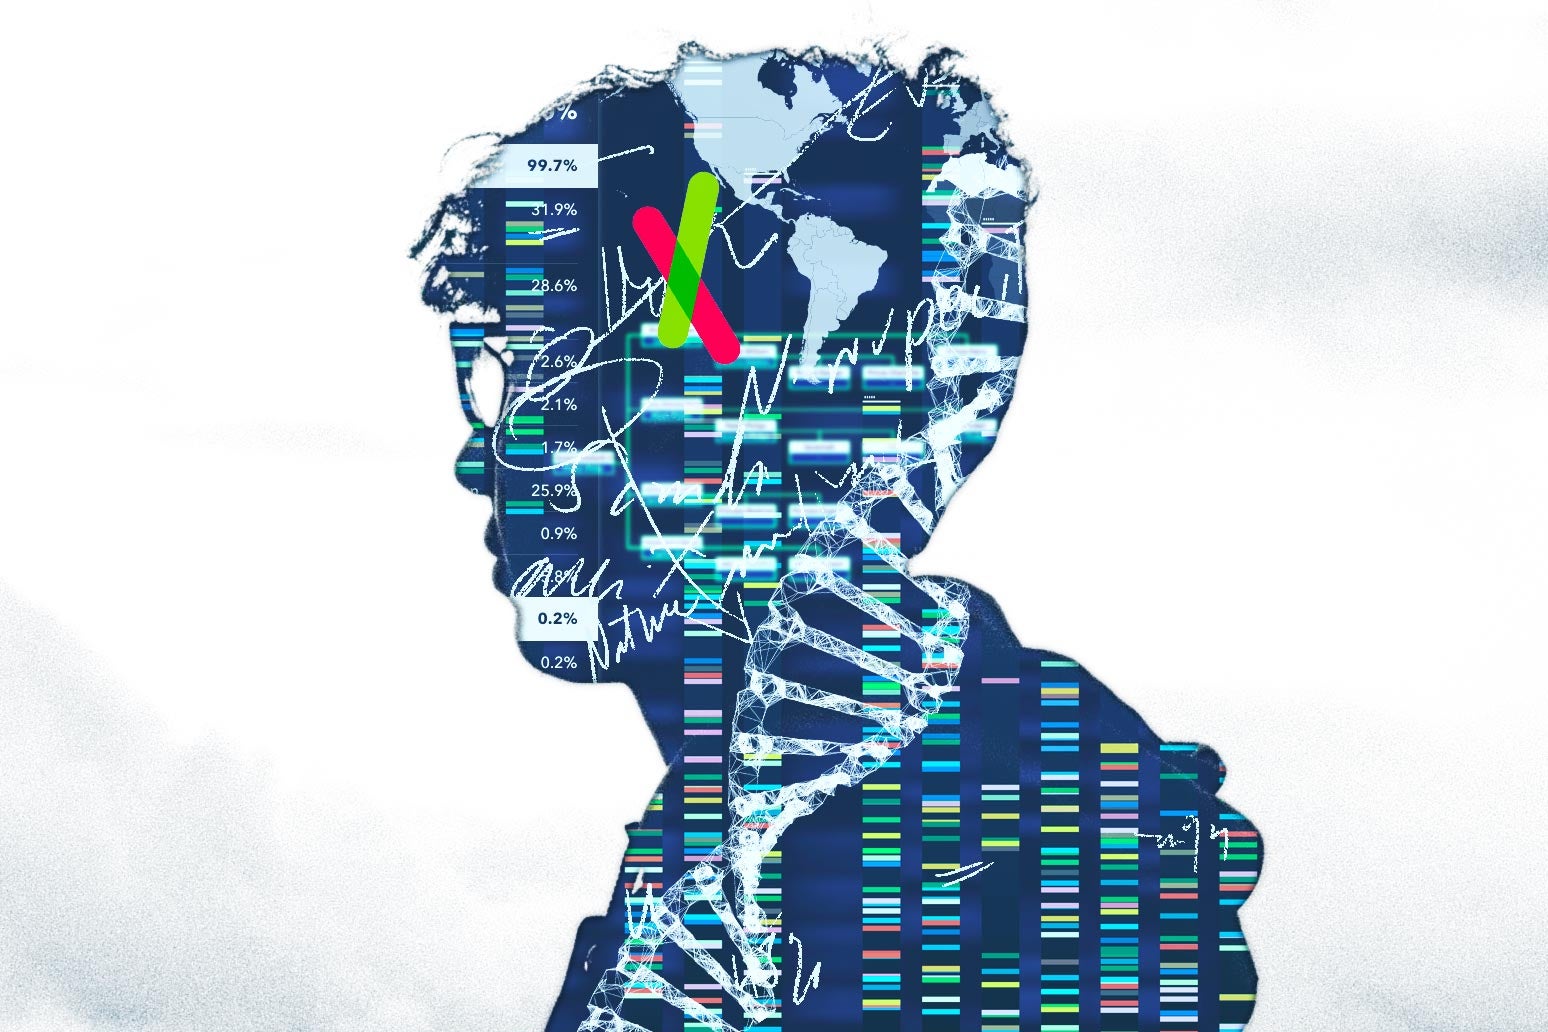 Collage of DNA and 23andMe images inside a silhouette of a man wearing glasses. 